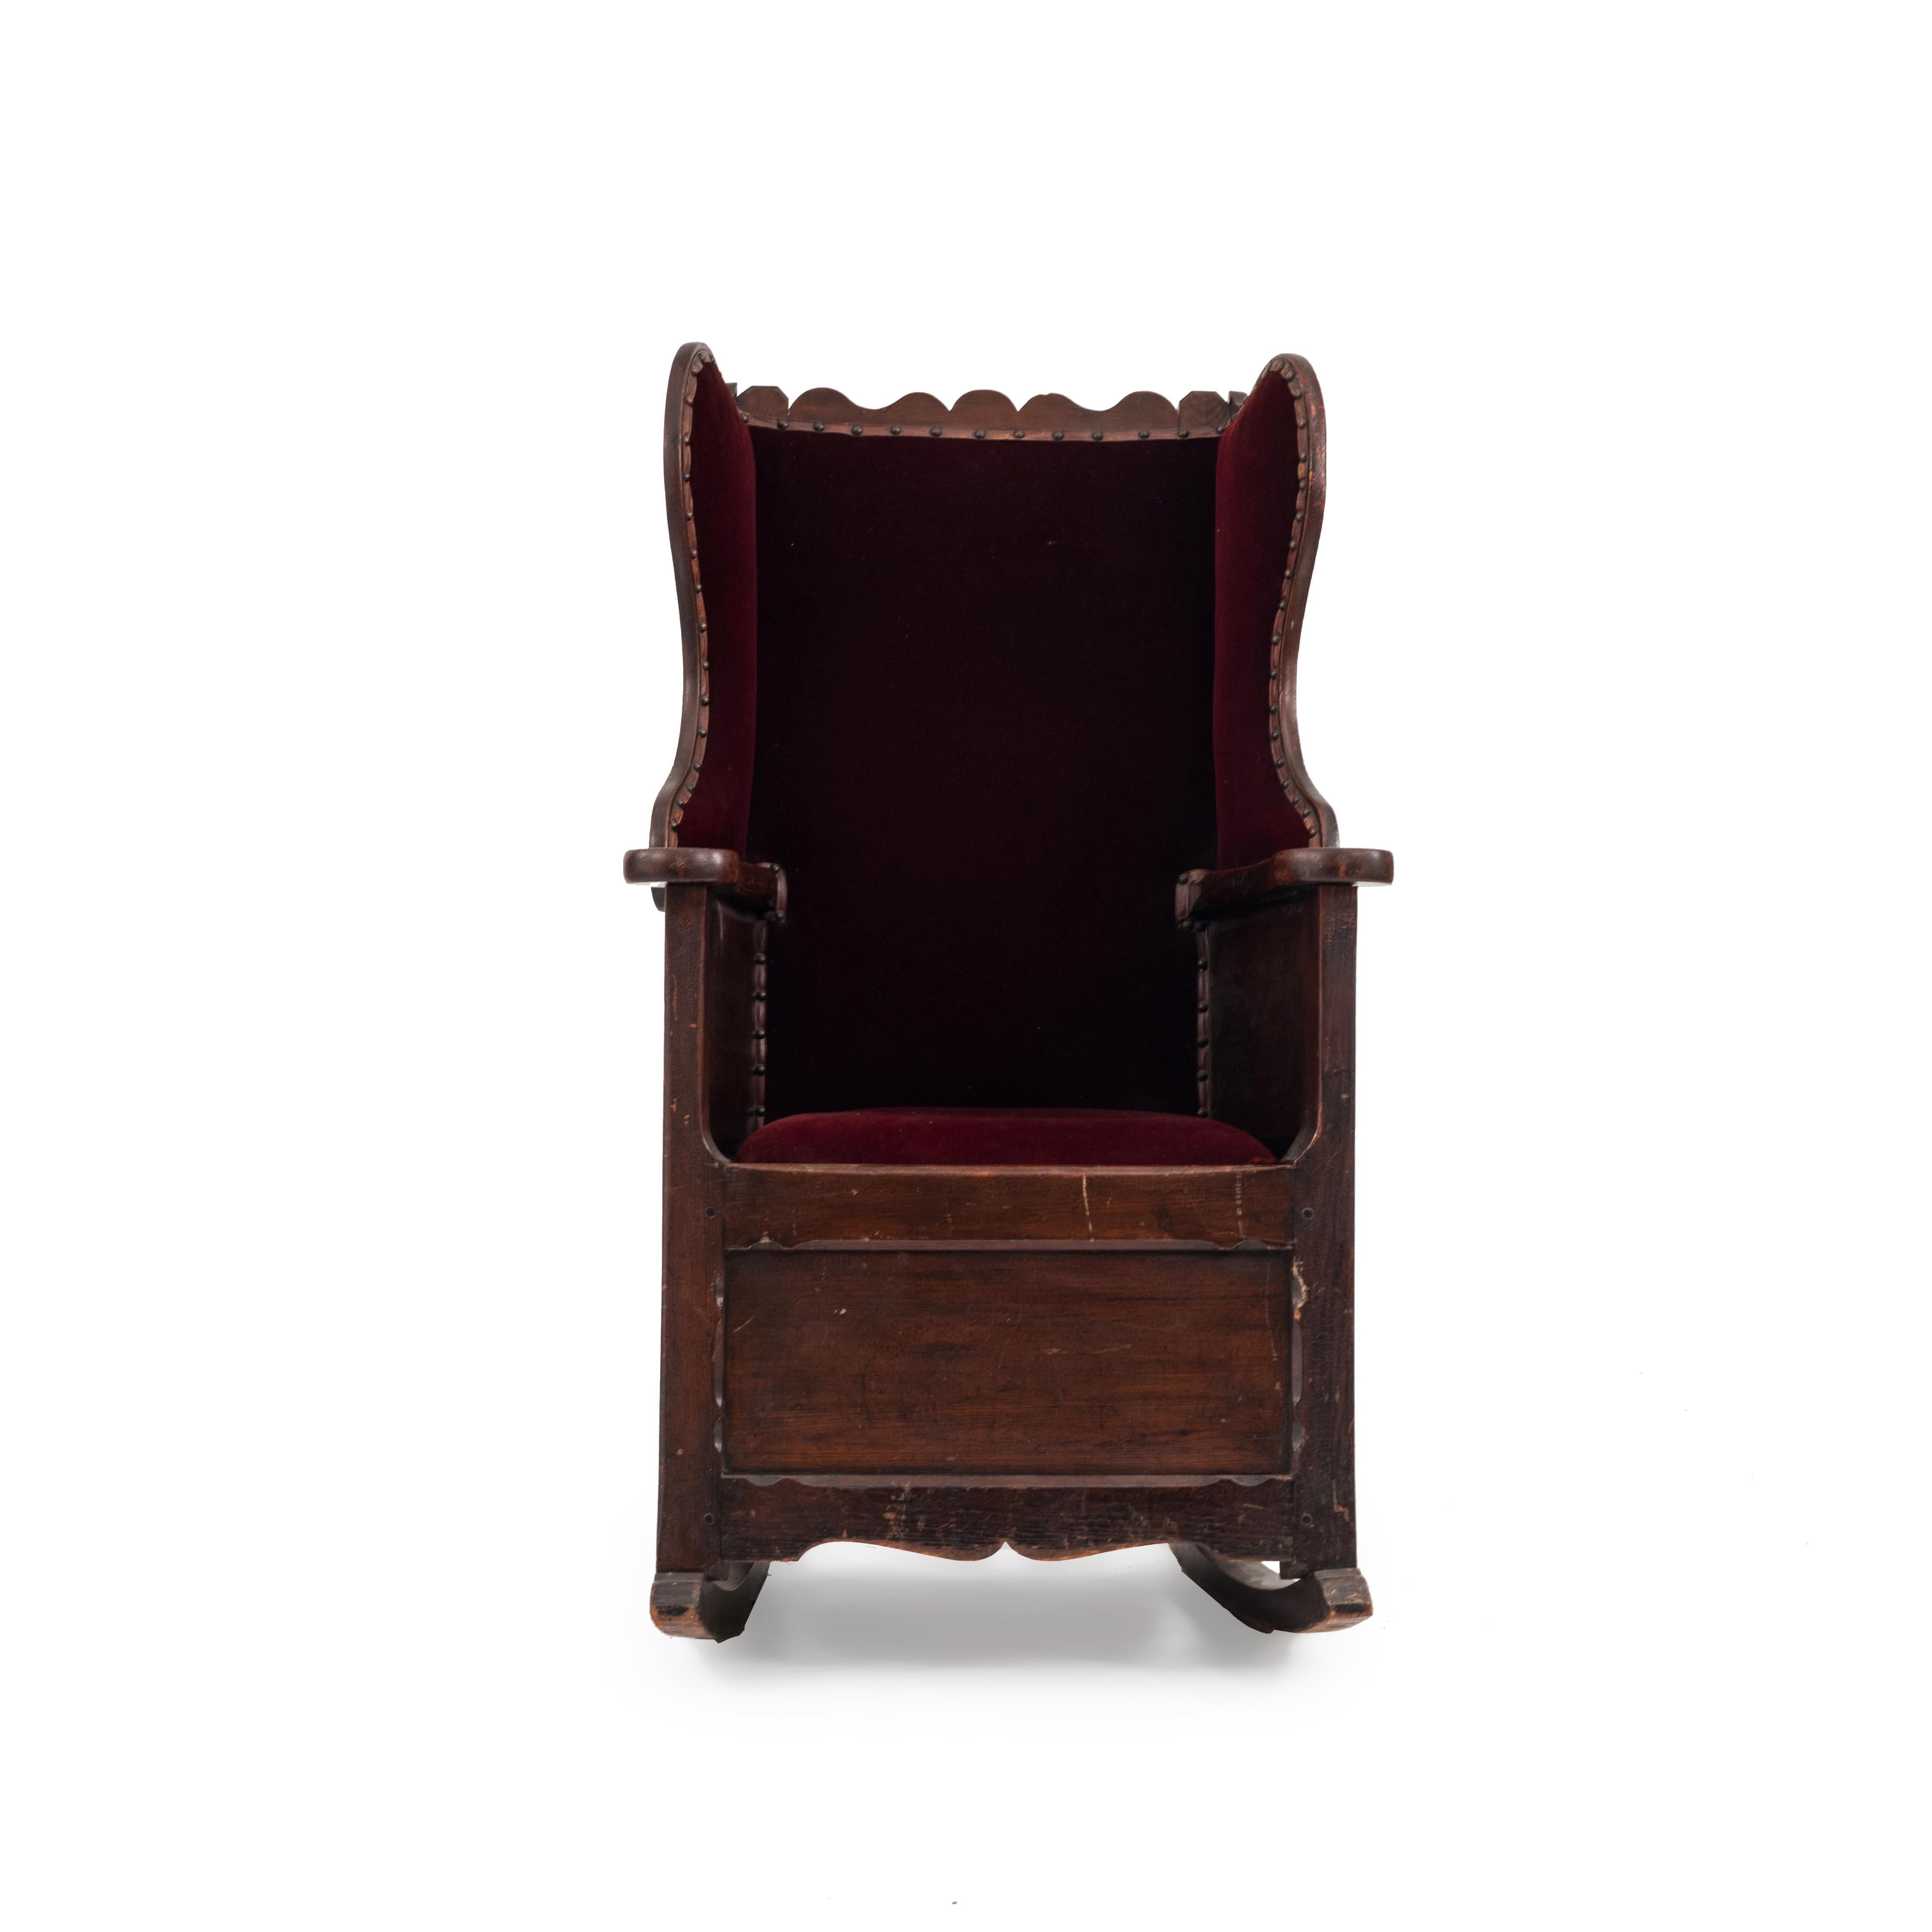 English country (18th-19th century) antique winged back pine rocking chair with scalloped back and red velvet upholstered seat & back.